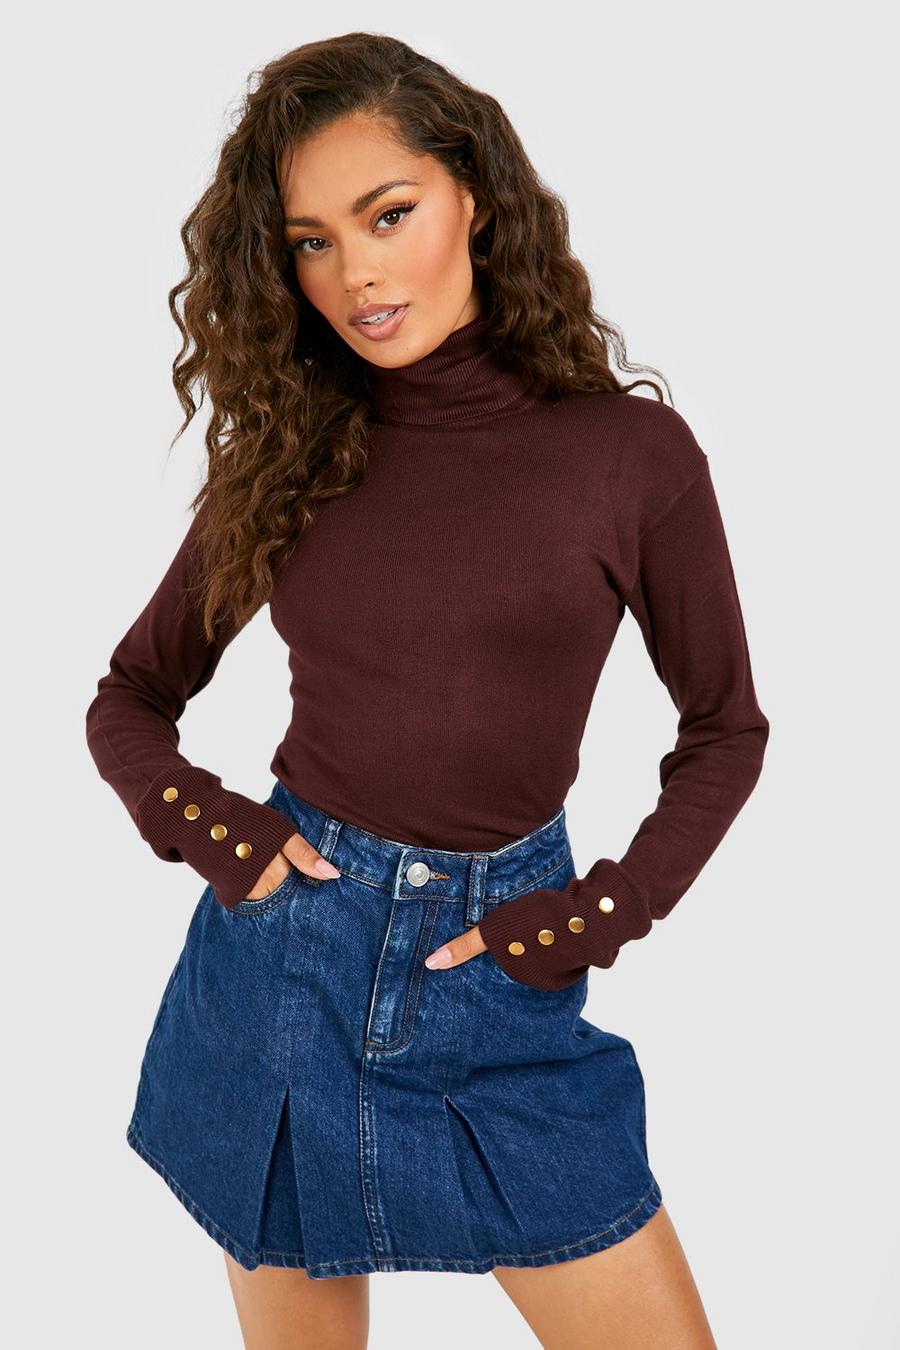 Brown Turtleneck Knitted Sweater With Buttons